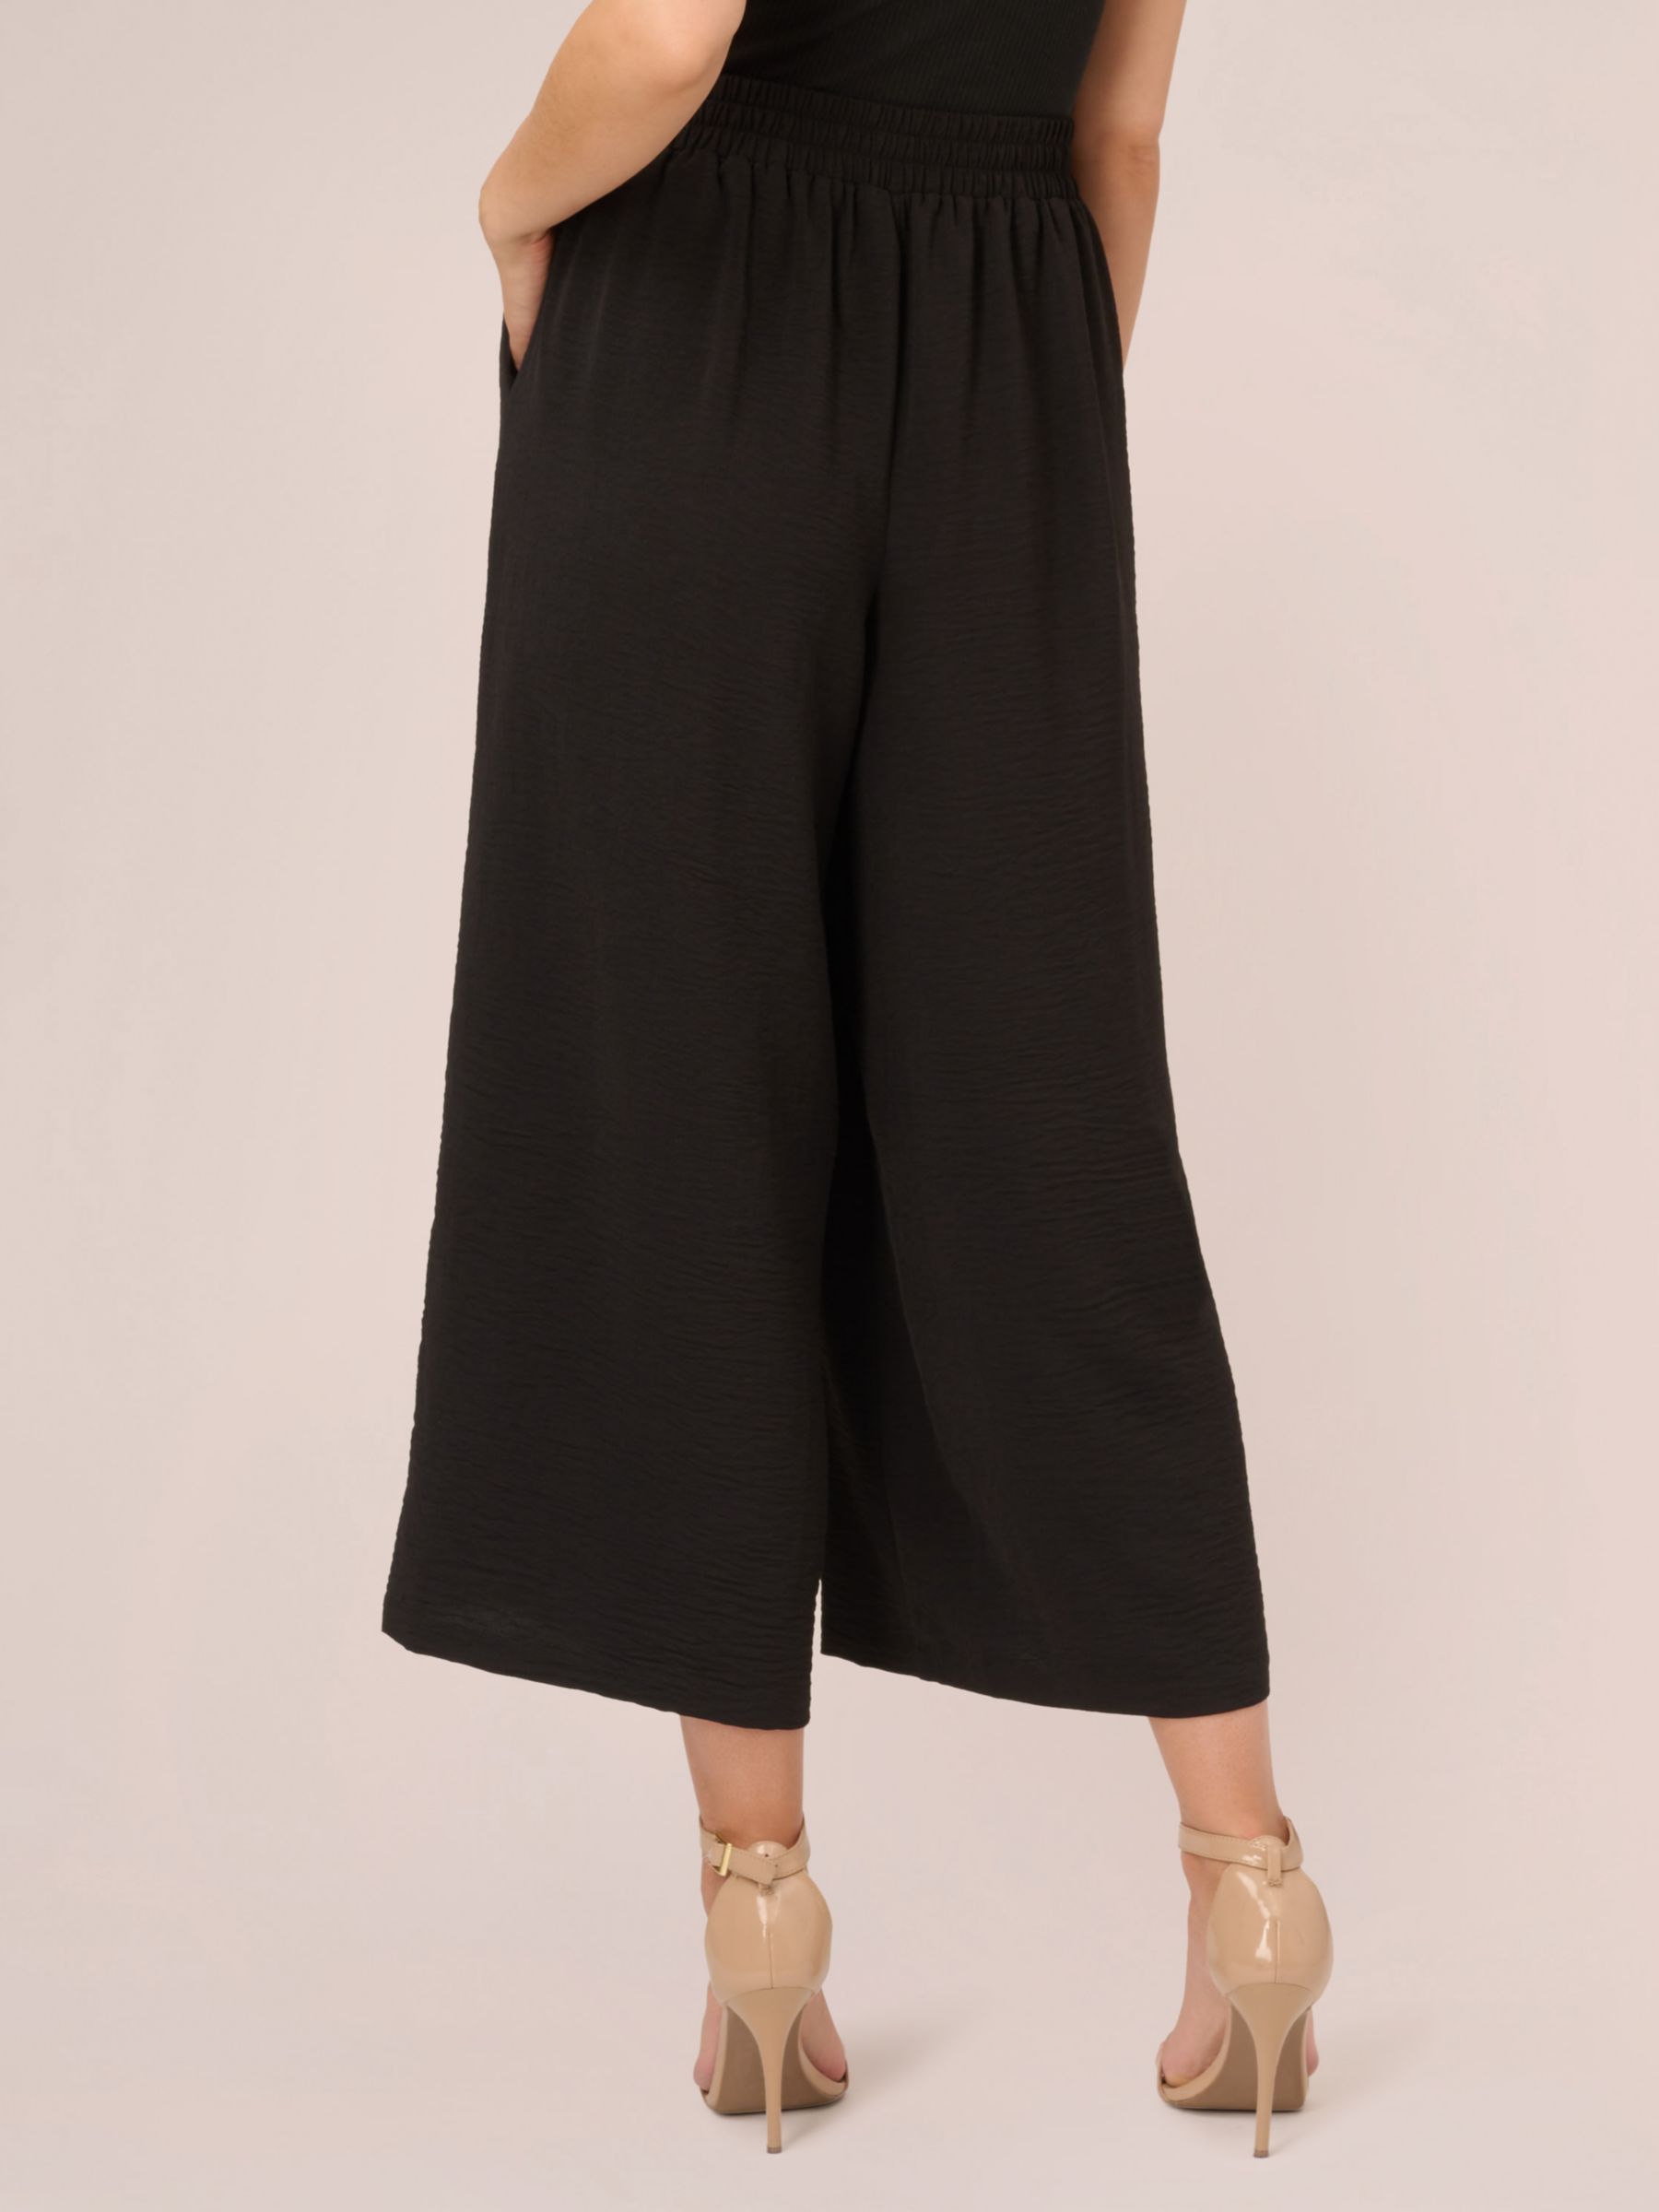 Buy Adrianna Papell Textured Wide Leg Pull On Trousers, Black Online at johnlewis.com